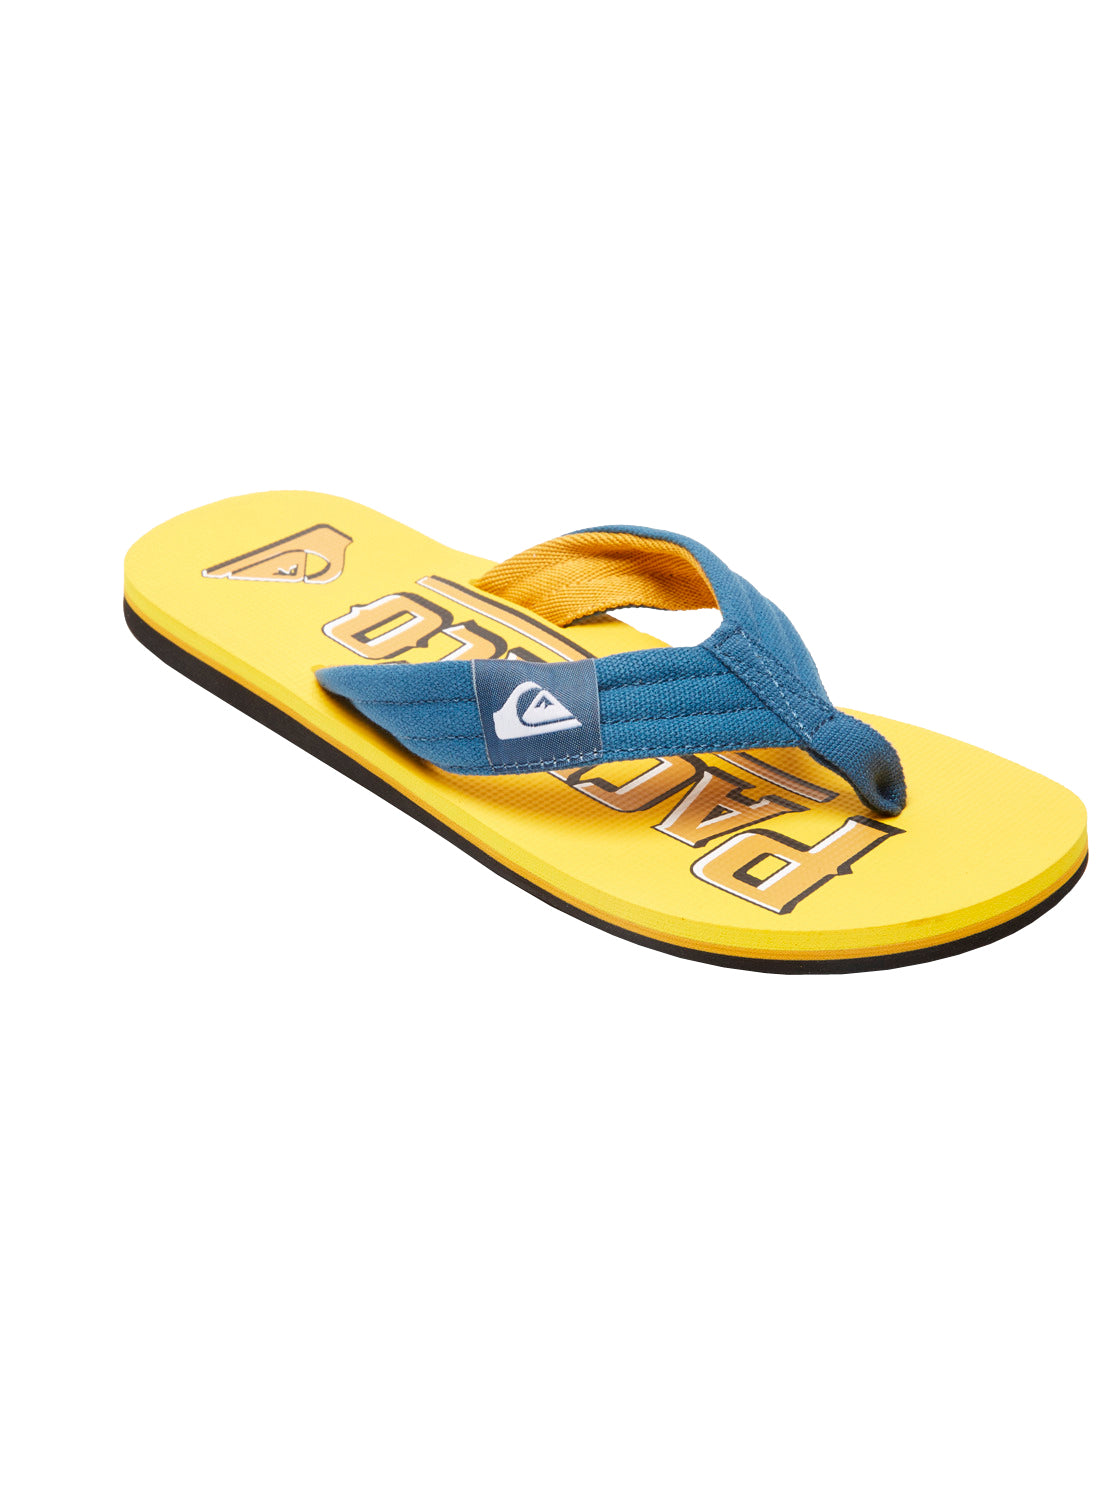 Quiksilver X Pacifico Layback Sandal XKKY 10